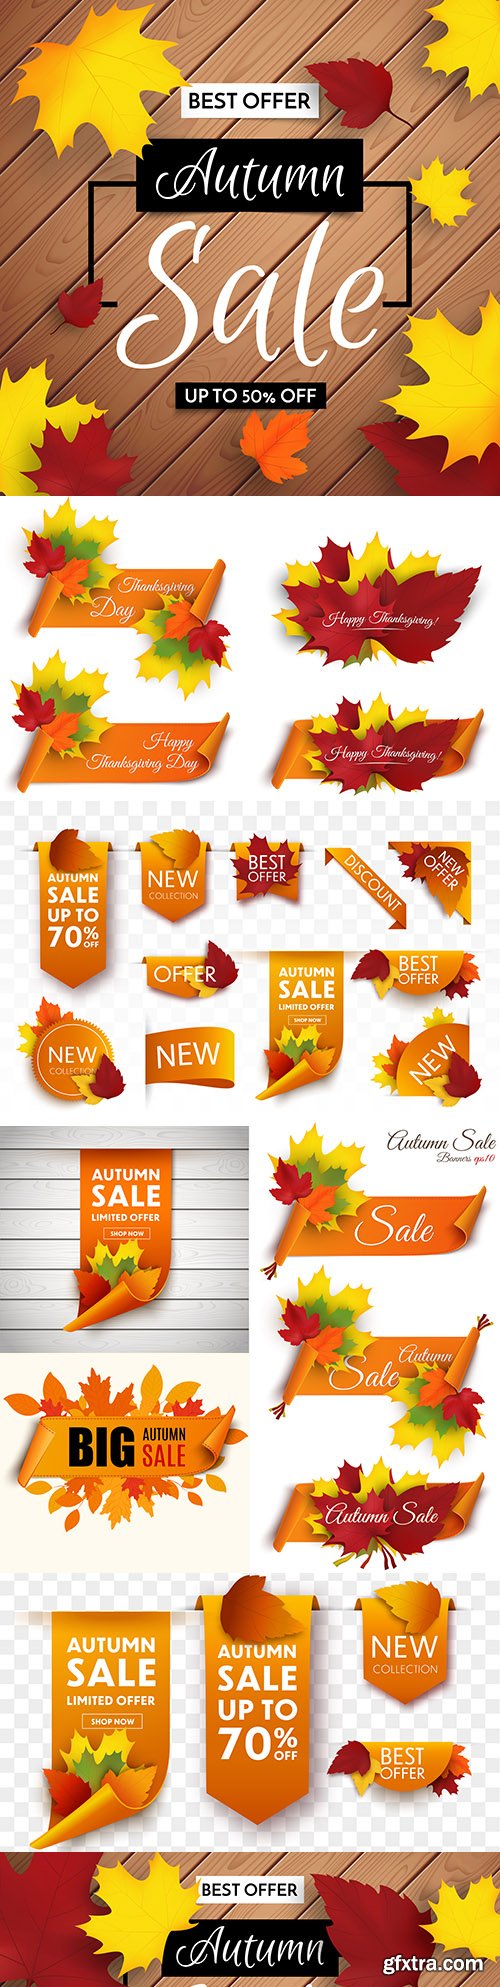 Autumn sale banner with shopping leaves or promotional poster
